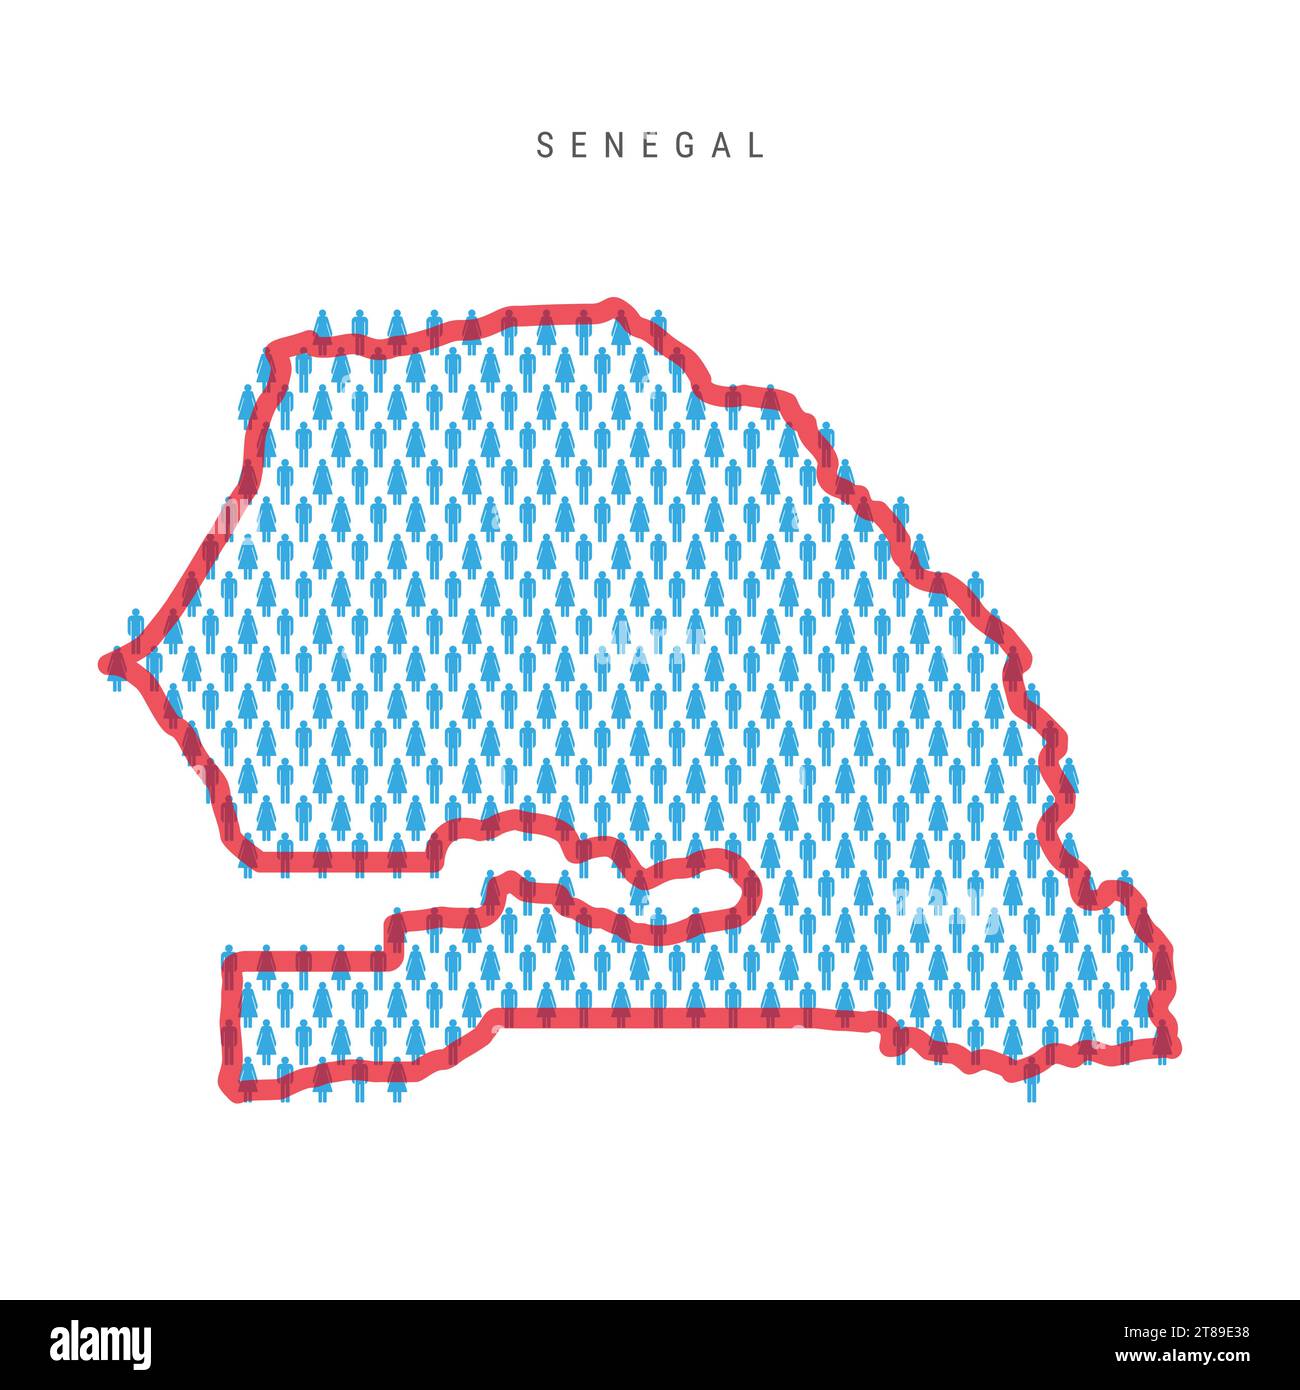 Senegal population map. Stick figures Senegalese people map with bold red translucent country border. Pattern of men and women icons. Isolated vector Stock Vector